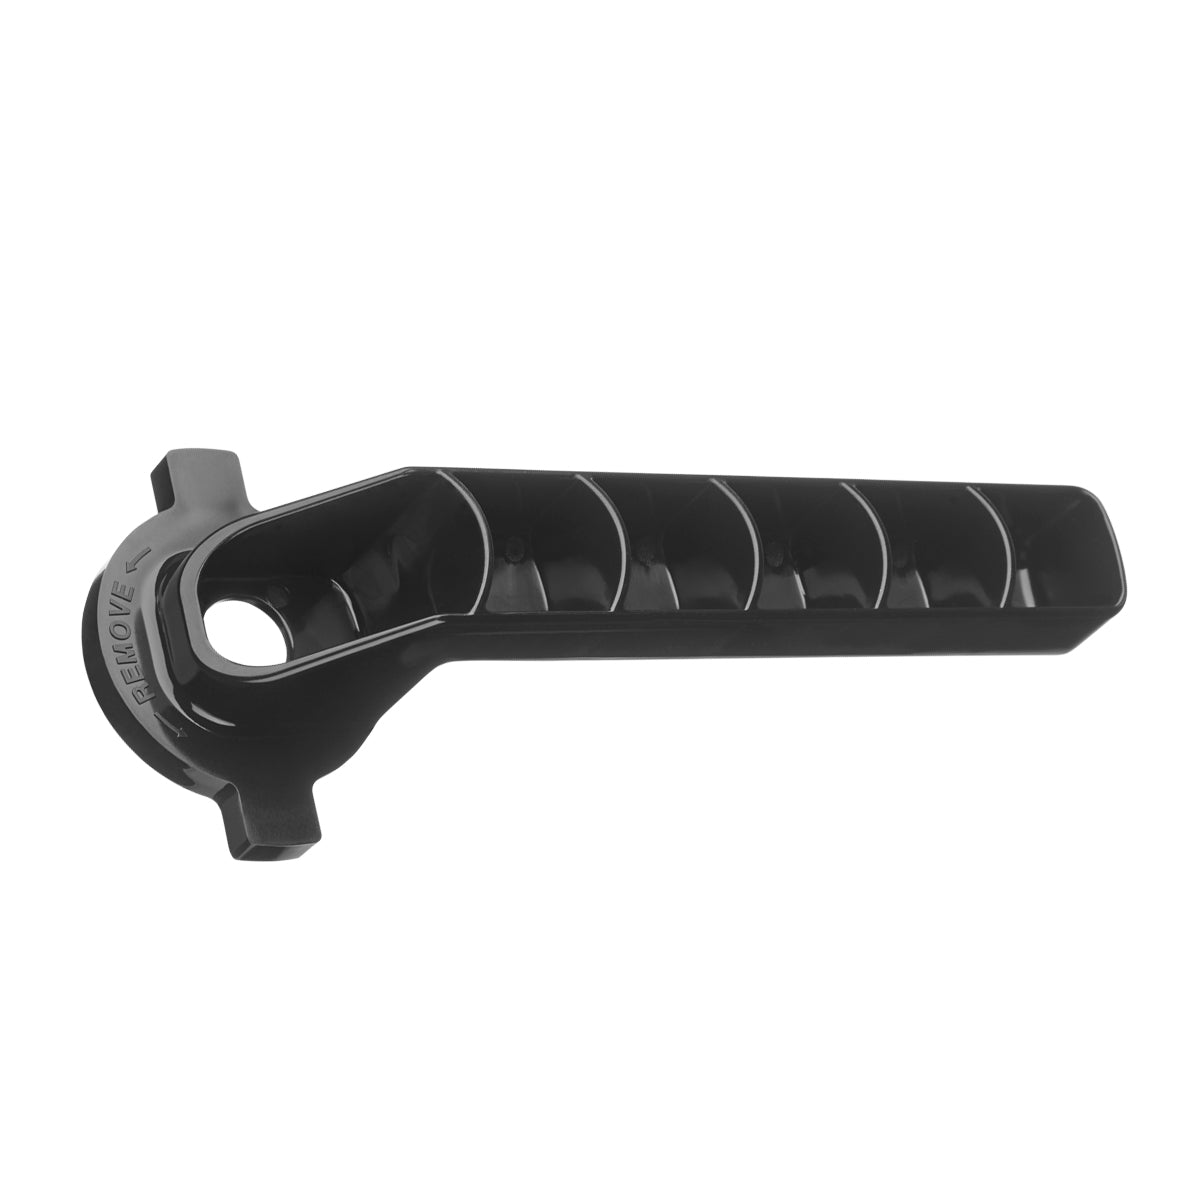 CAC119 - Retainer Ring Wrench - Spanner Wrench for CAC95 (to remove Blade Assembly from Container)